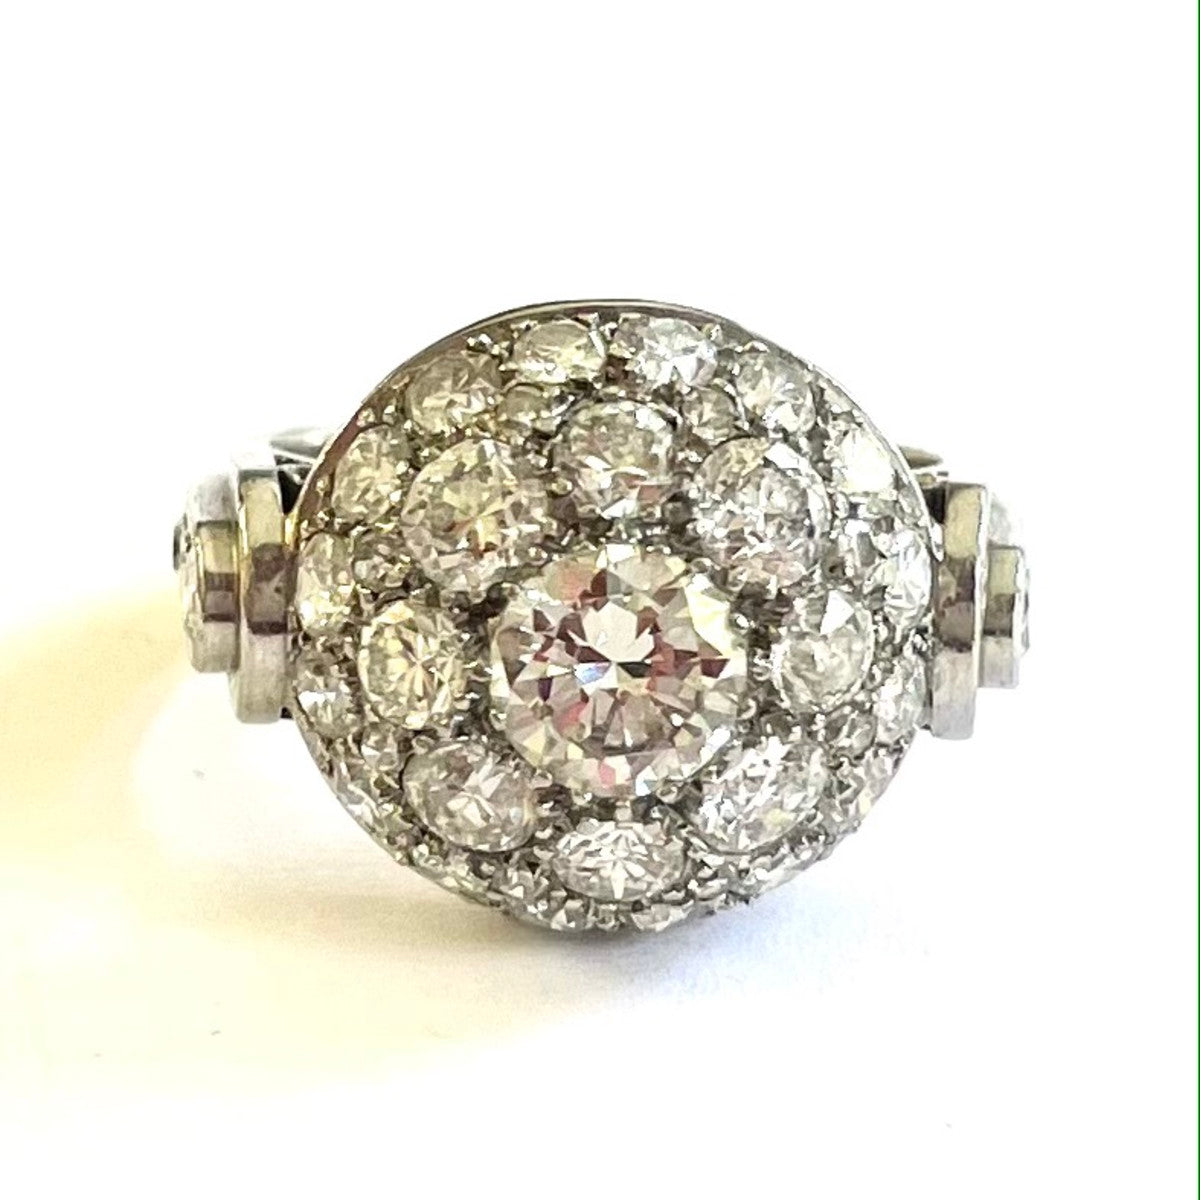 French 1940s Platinum Diamond Ring front